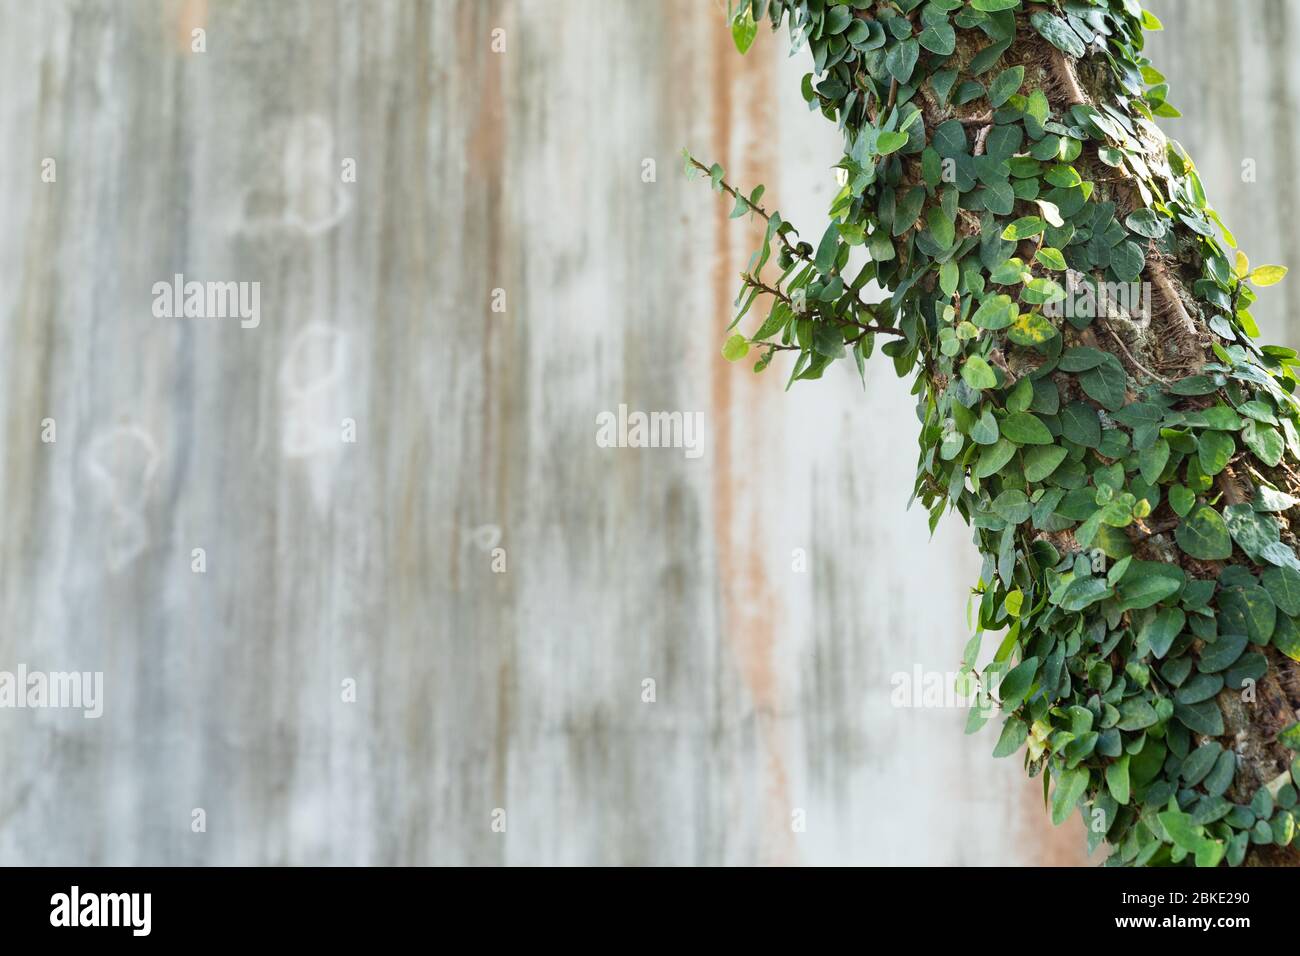 The Green creeper plant on grunge old house wall. Abstract plant wall background. Stock Photo